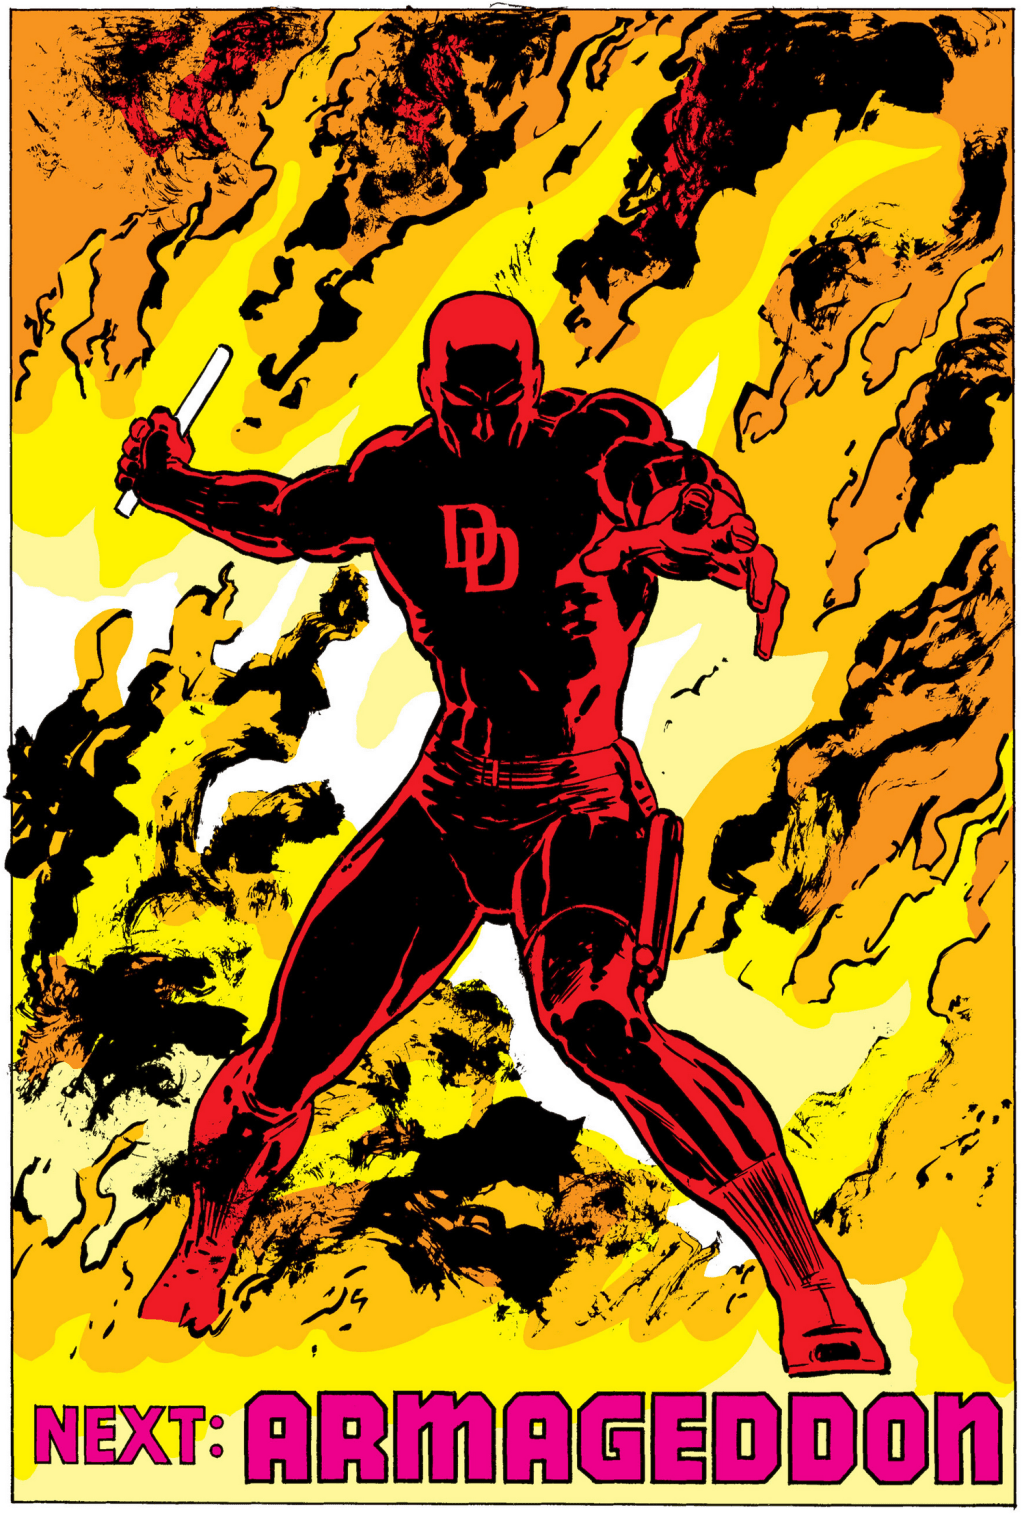 Daredevil rises from the ashes in Daredevil Vol. 1 #232 "God and Country" (1986), Marvel Comics. Words by Frank Miller, art by David Mazzucchelli, Max Scheele, and Joe Rosen.